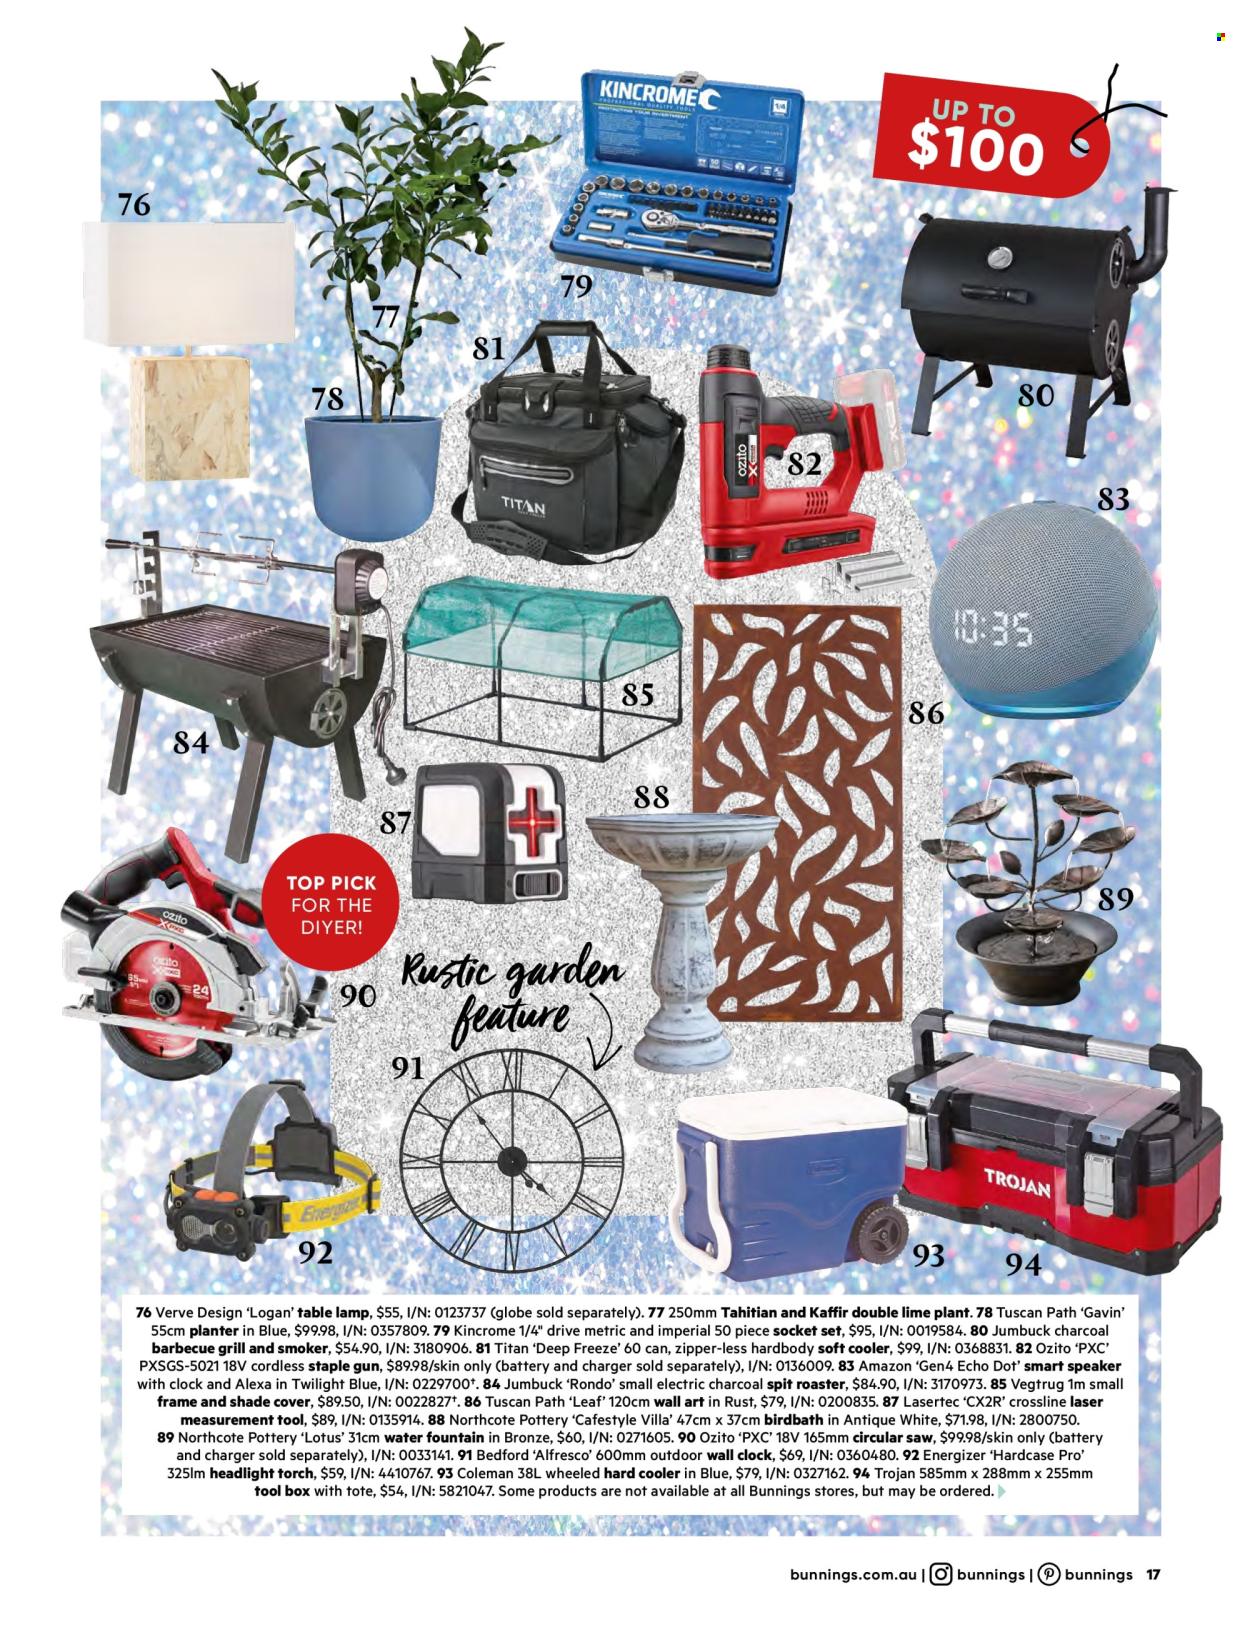 thumbnail - Bunnings Warehouse Catalogue - Sales products - chair, Lotus, hanging planter, tote, fork, thermometer, pot, pin, battery, Energizer, wall charger, Amazon Echo Dot, speaker, roaster, lamp, Stanley, table lamp, socket, DeWALT, screwdriver, circular saw, saw, snips, socket set, safety glasses, utility knife, tool belt, smoker. Page 17.